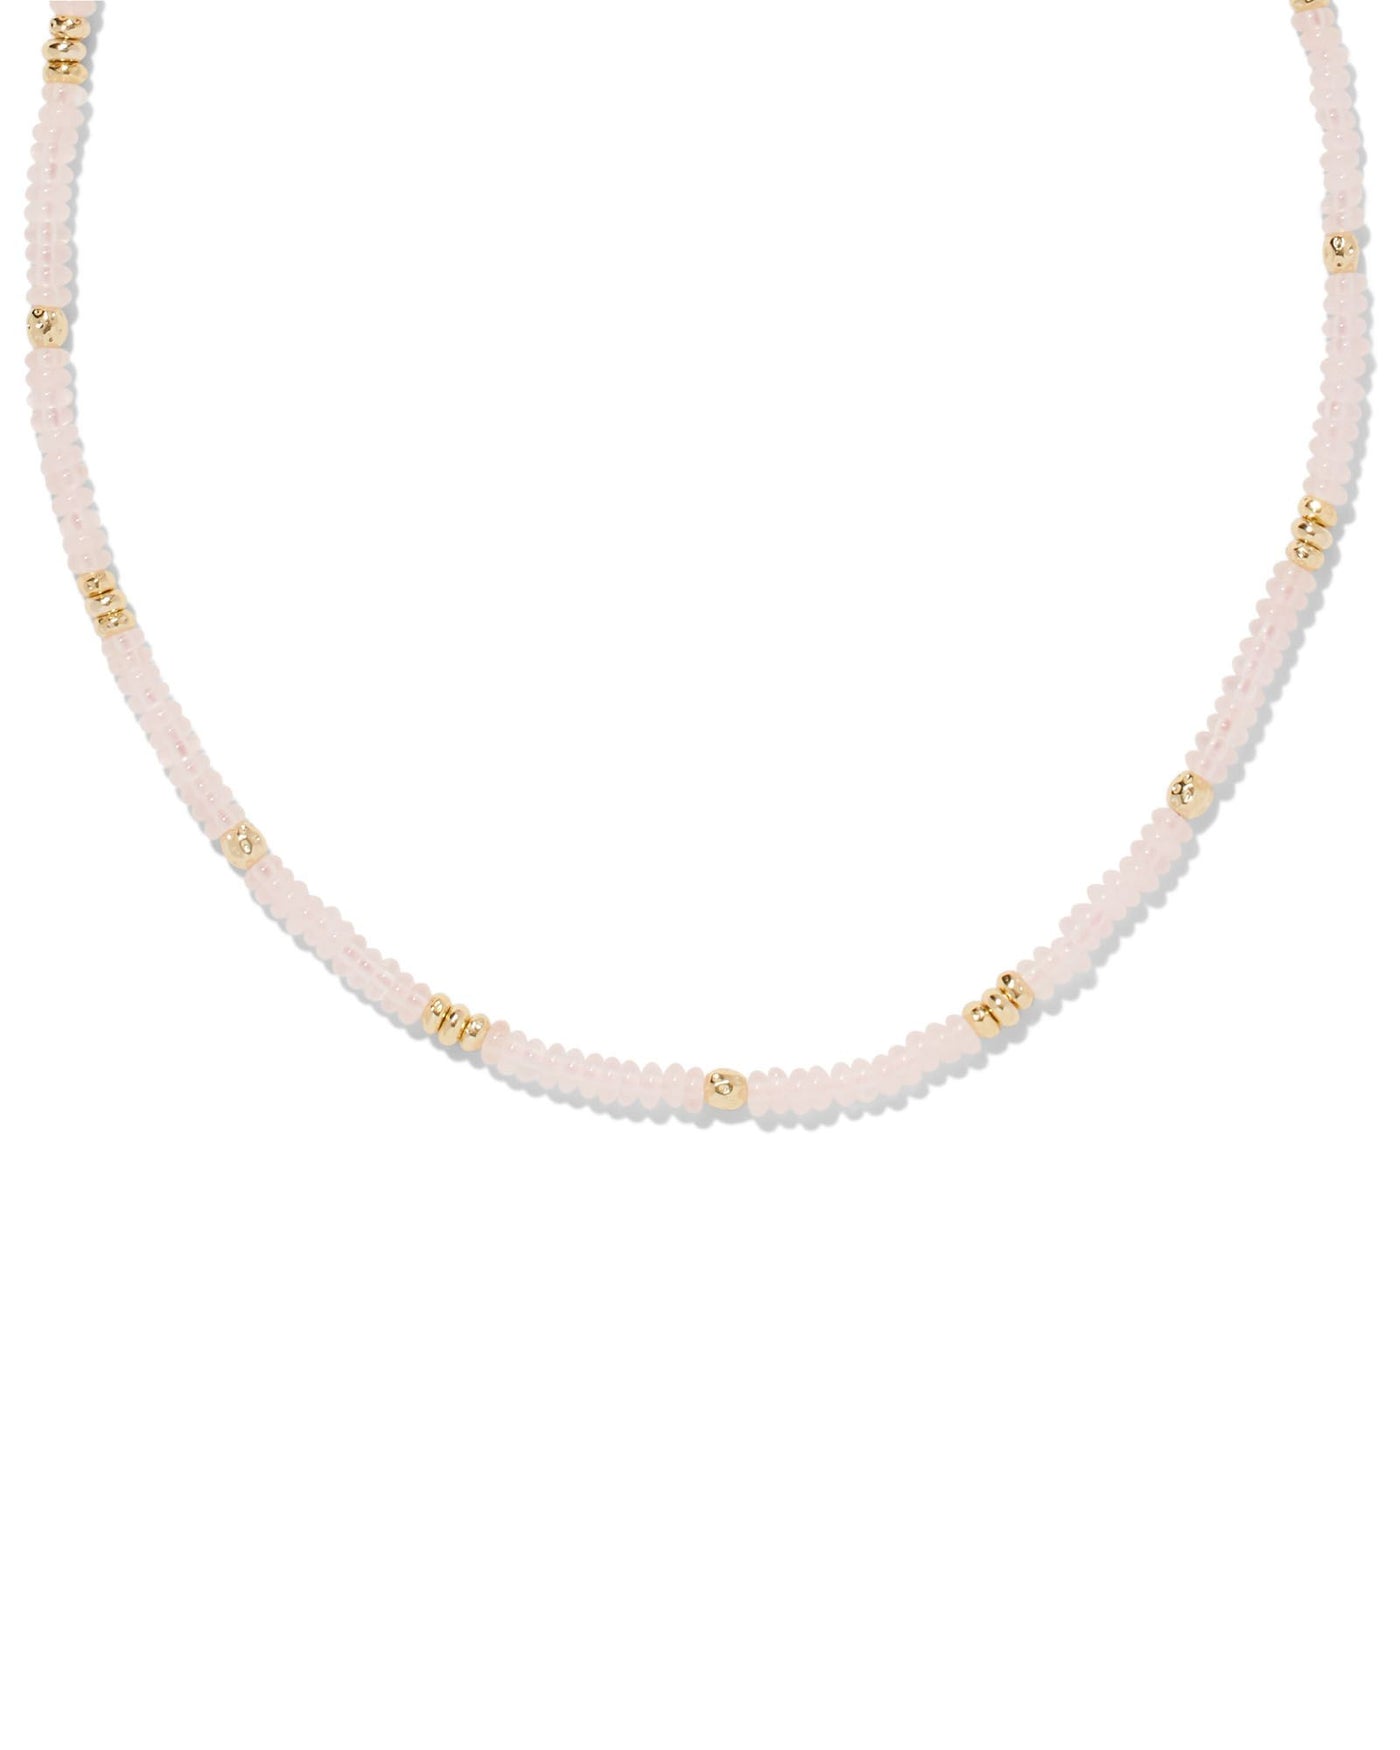 Kendra Scott Deliah Strand Necklace-Necklaces-Kendra Scott-Market Street Nest, Fashionable Clothing, Shoes and Home Décor Located in Mabank, TX